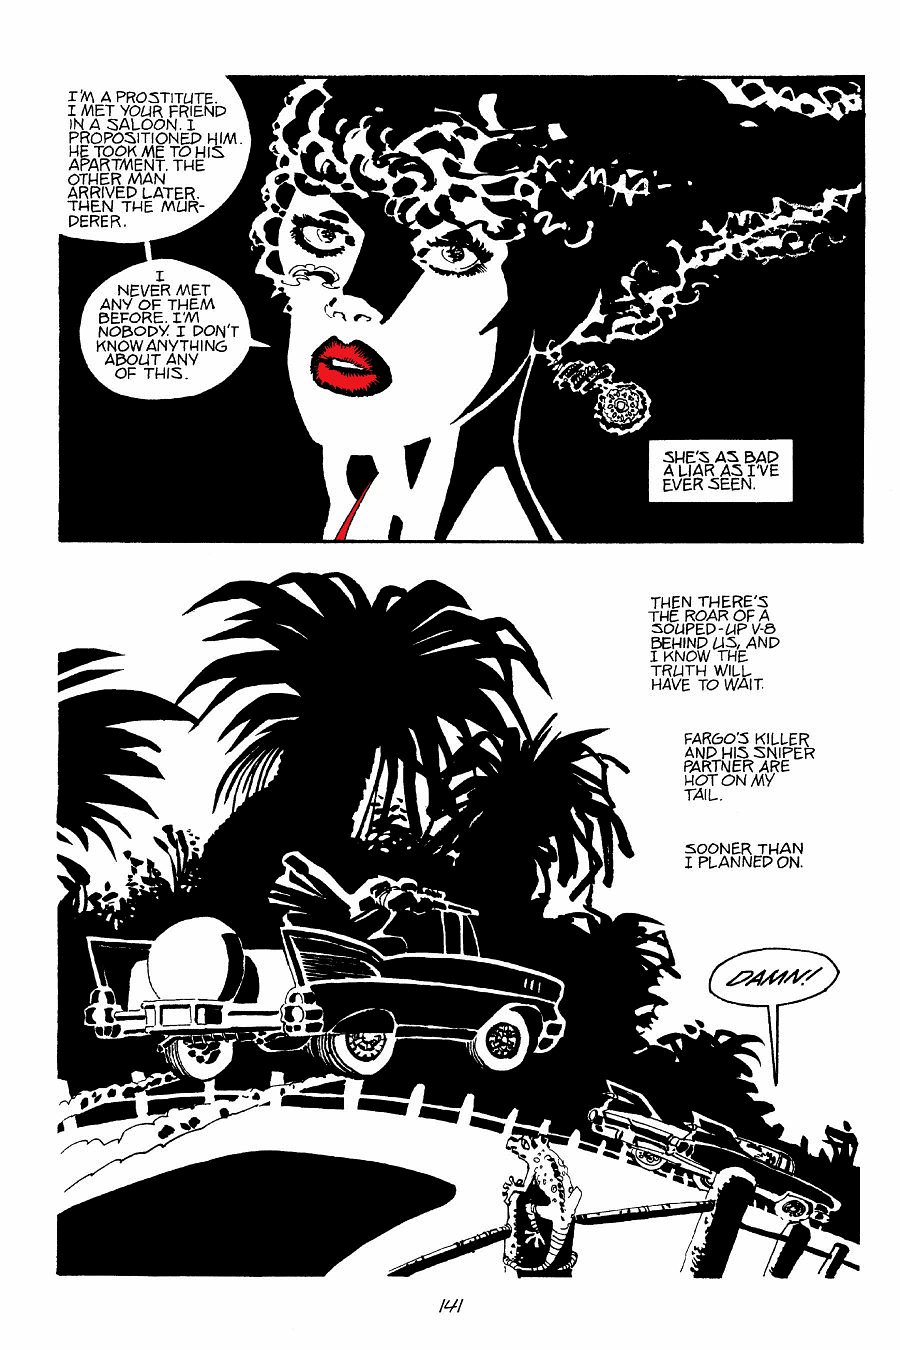 page 141 of sin city 6 booze broads and bullets